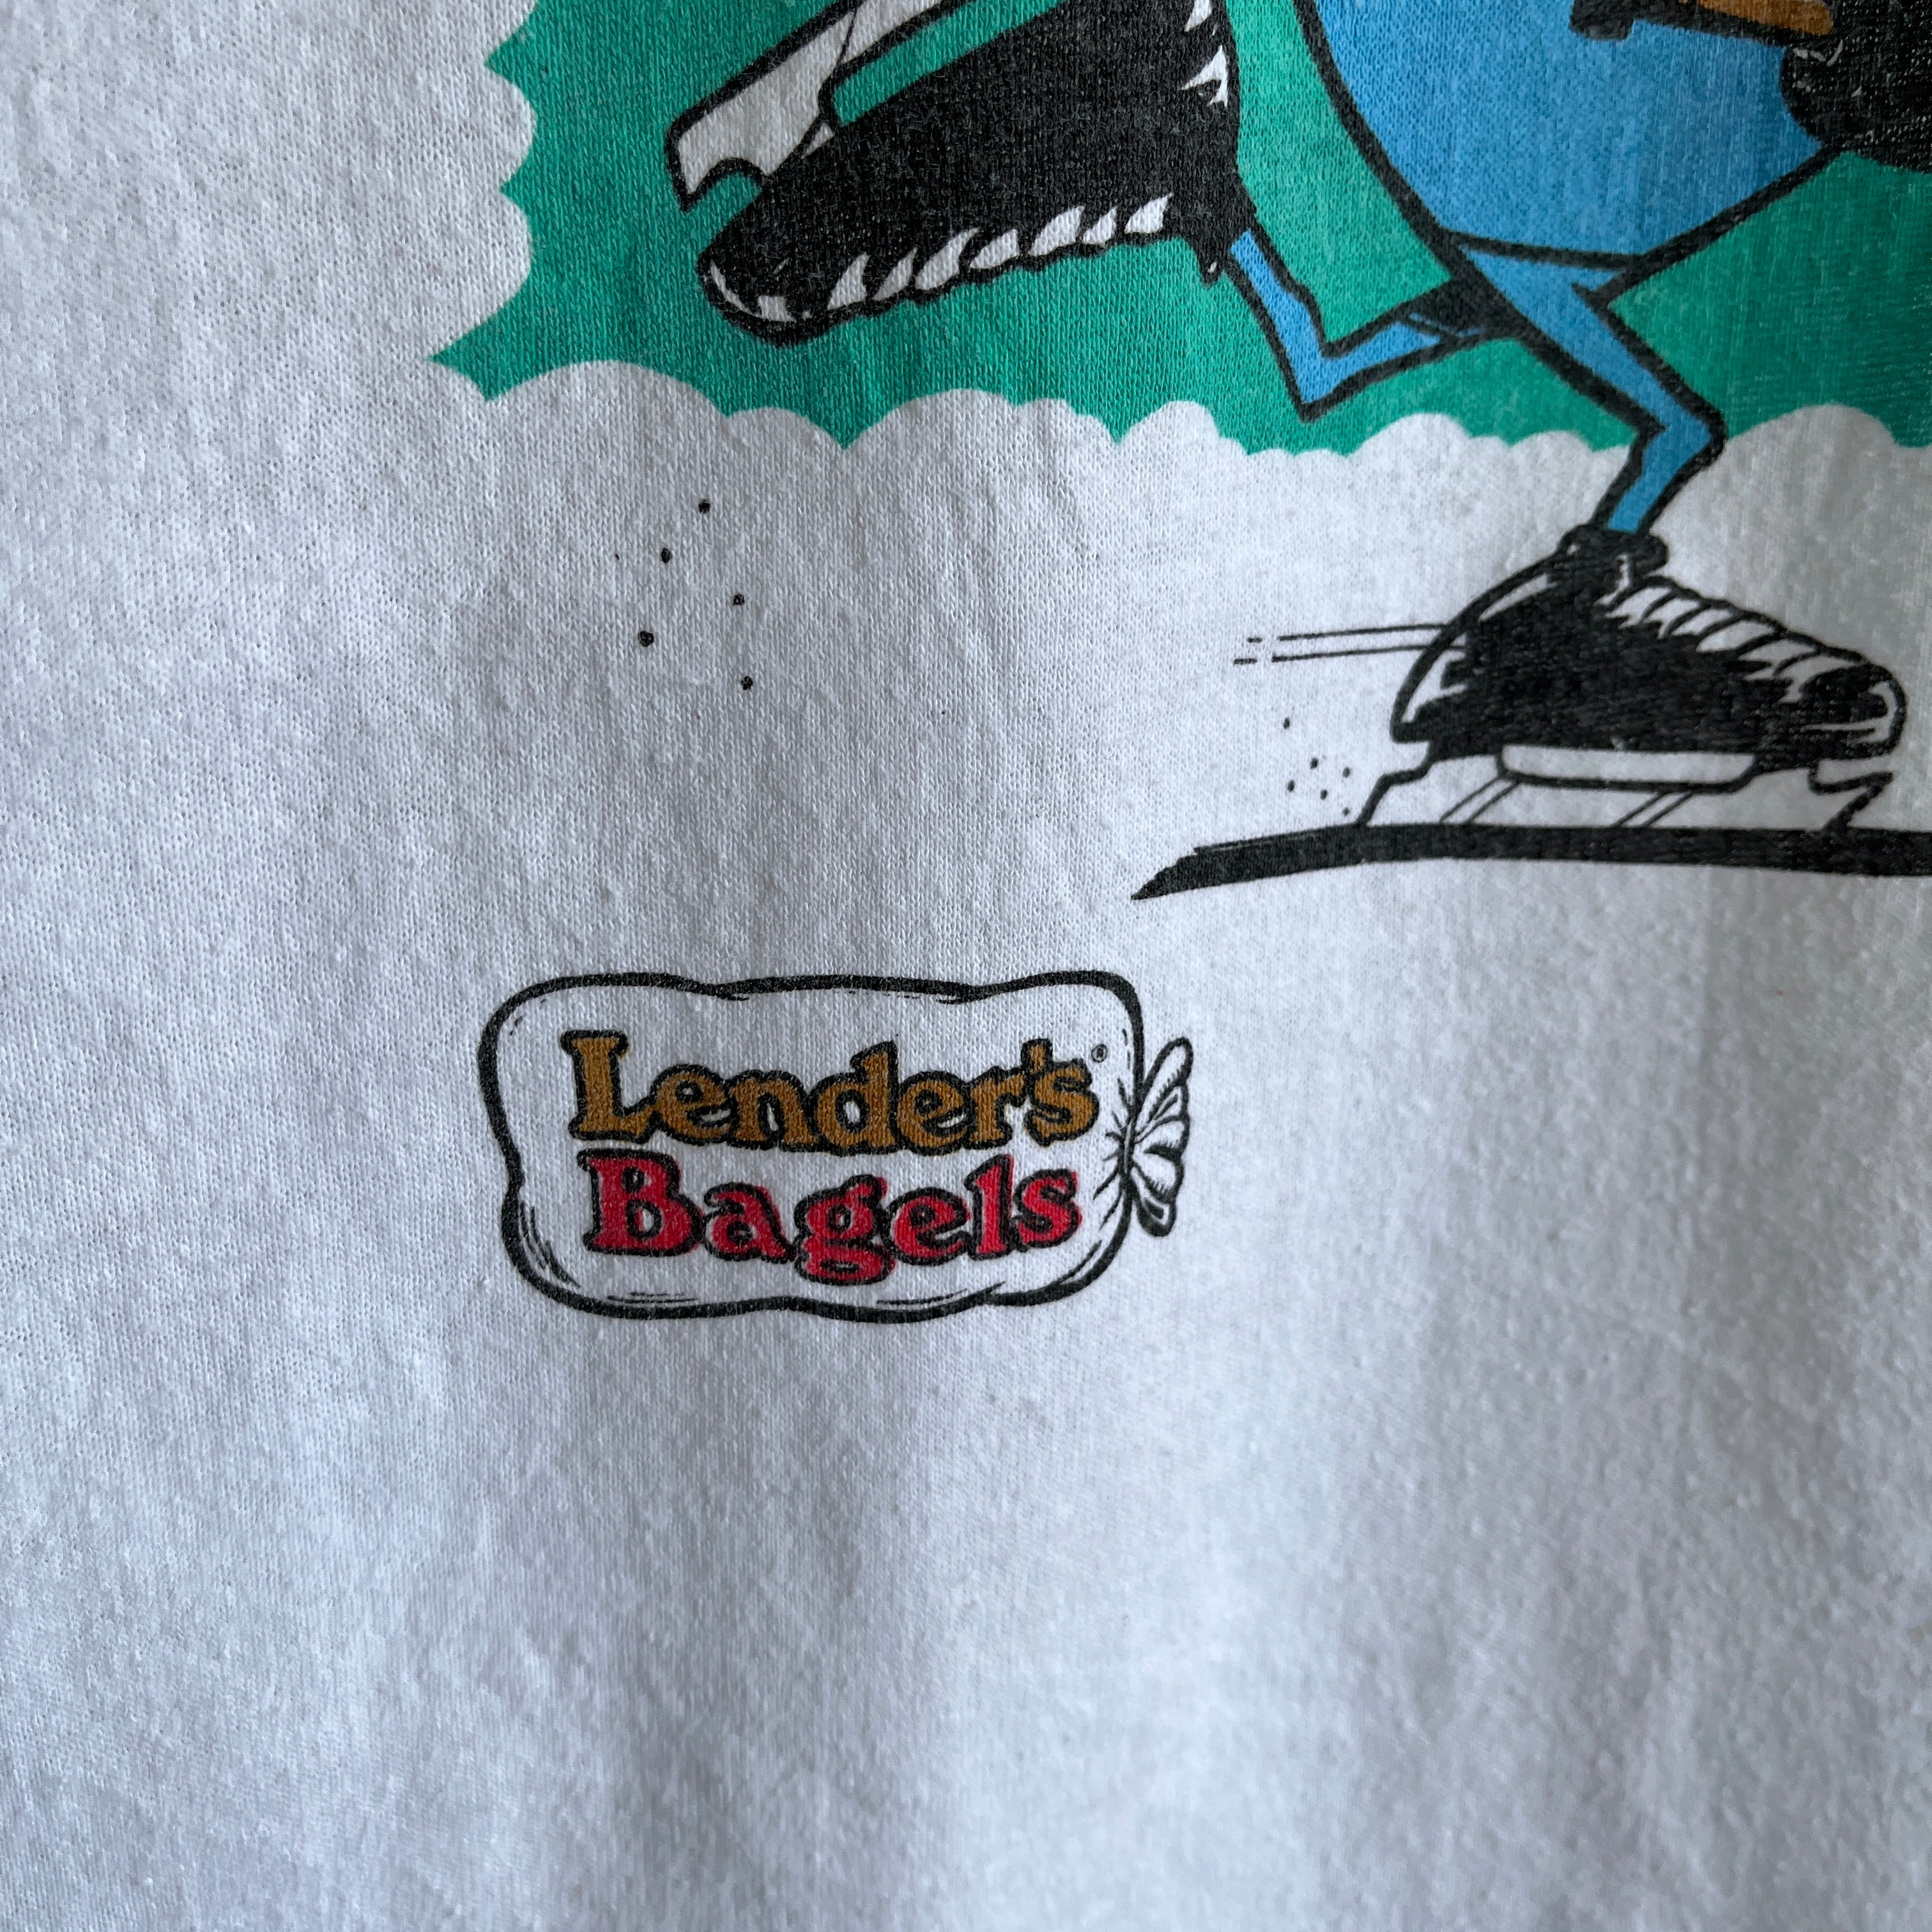 1980s Bagel Birds by Stedman - Maybe Best Advertising Ever?!